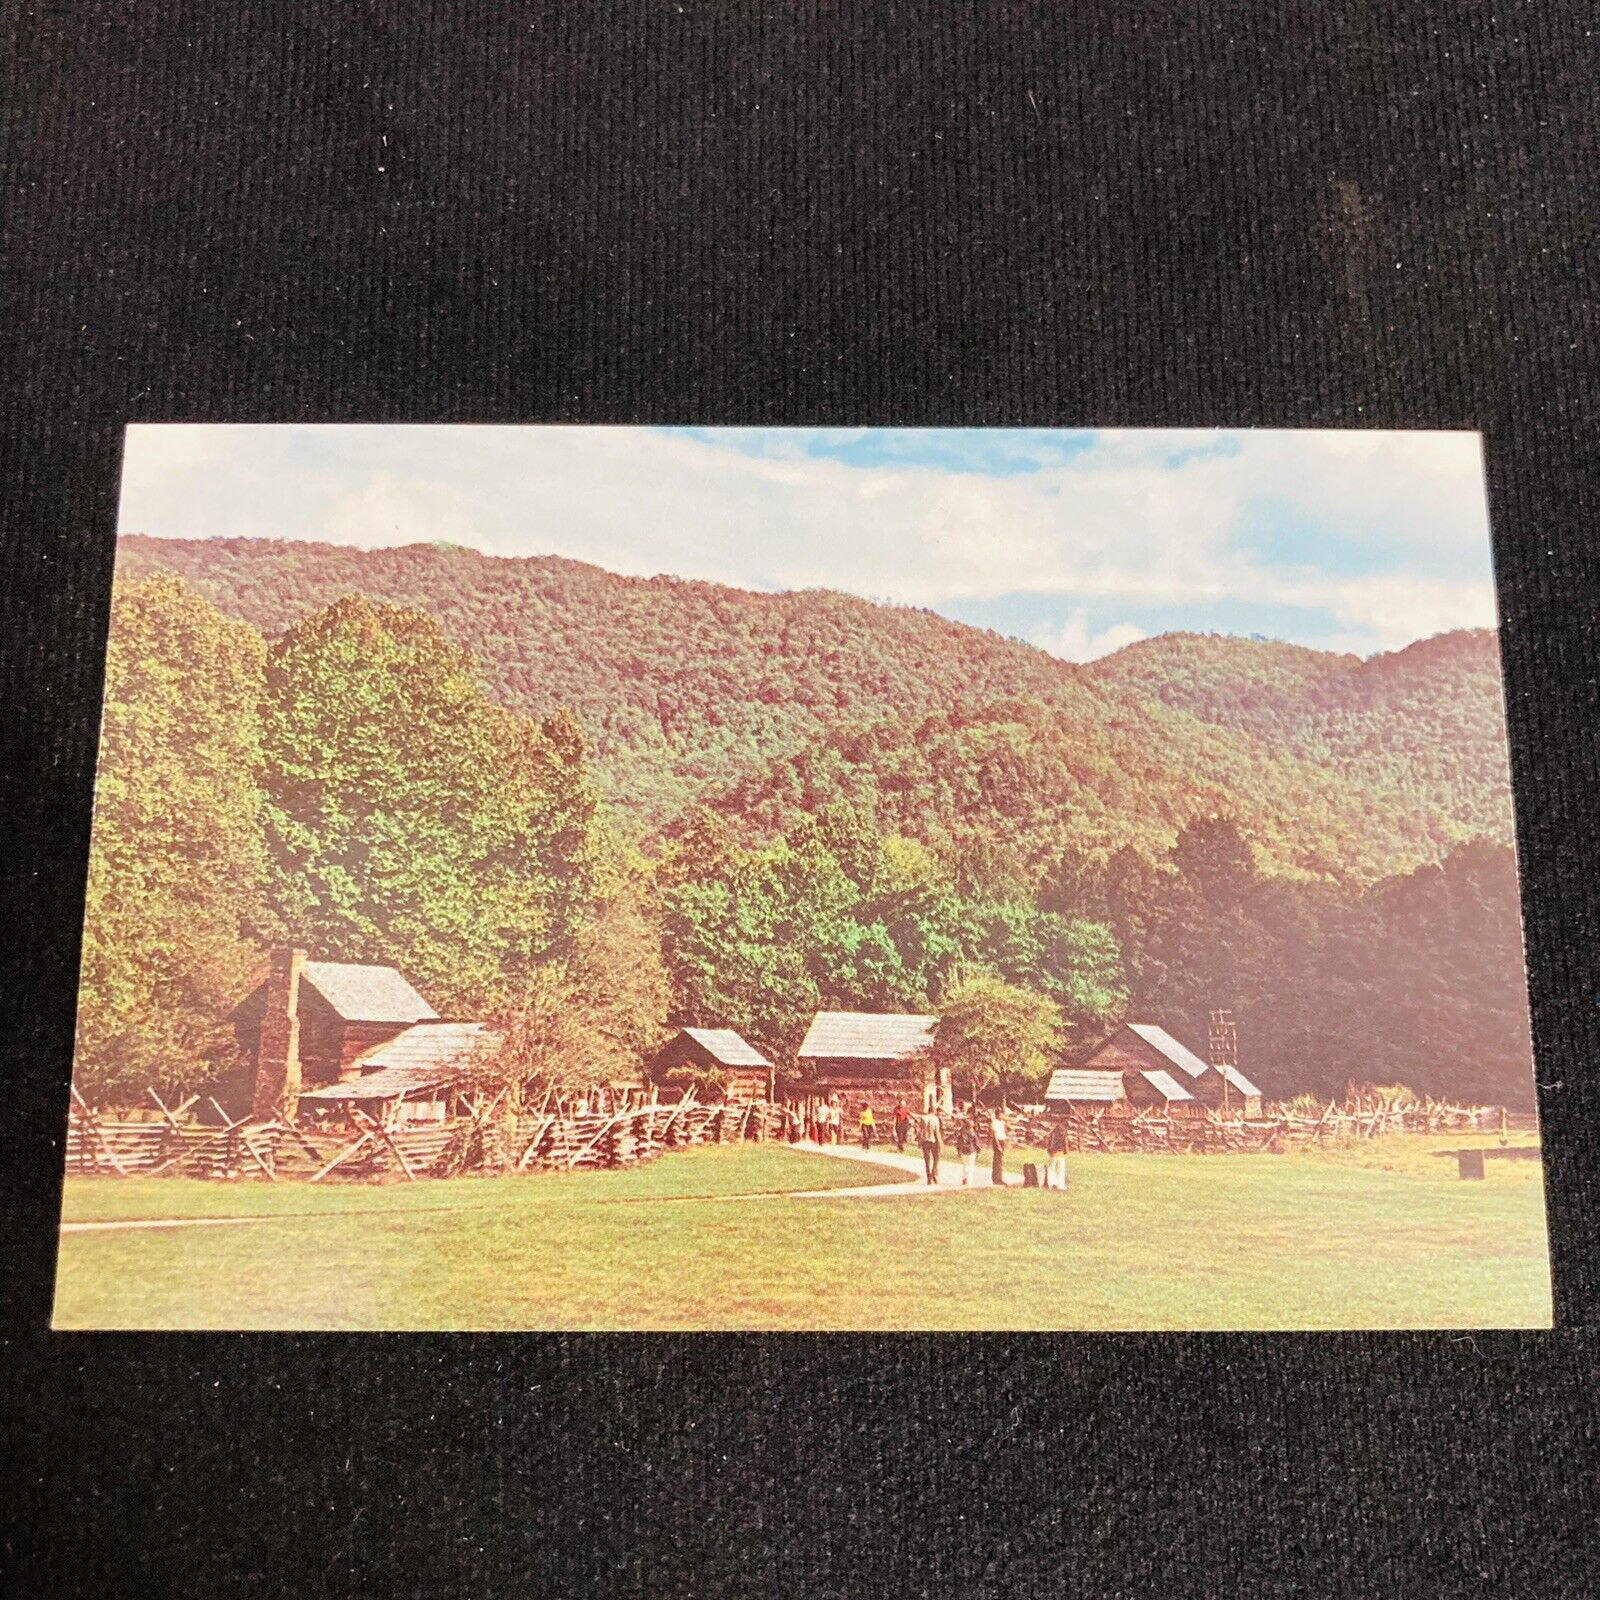 VTG‼ Great Smoky Mountains National Park Pioneer Farmstead Postcard • UNPOSTED‼